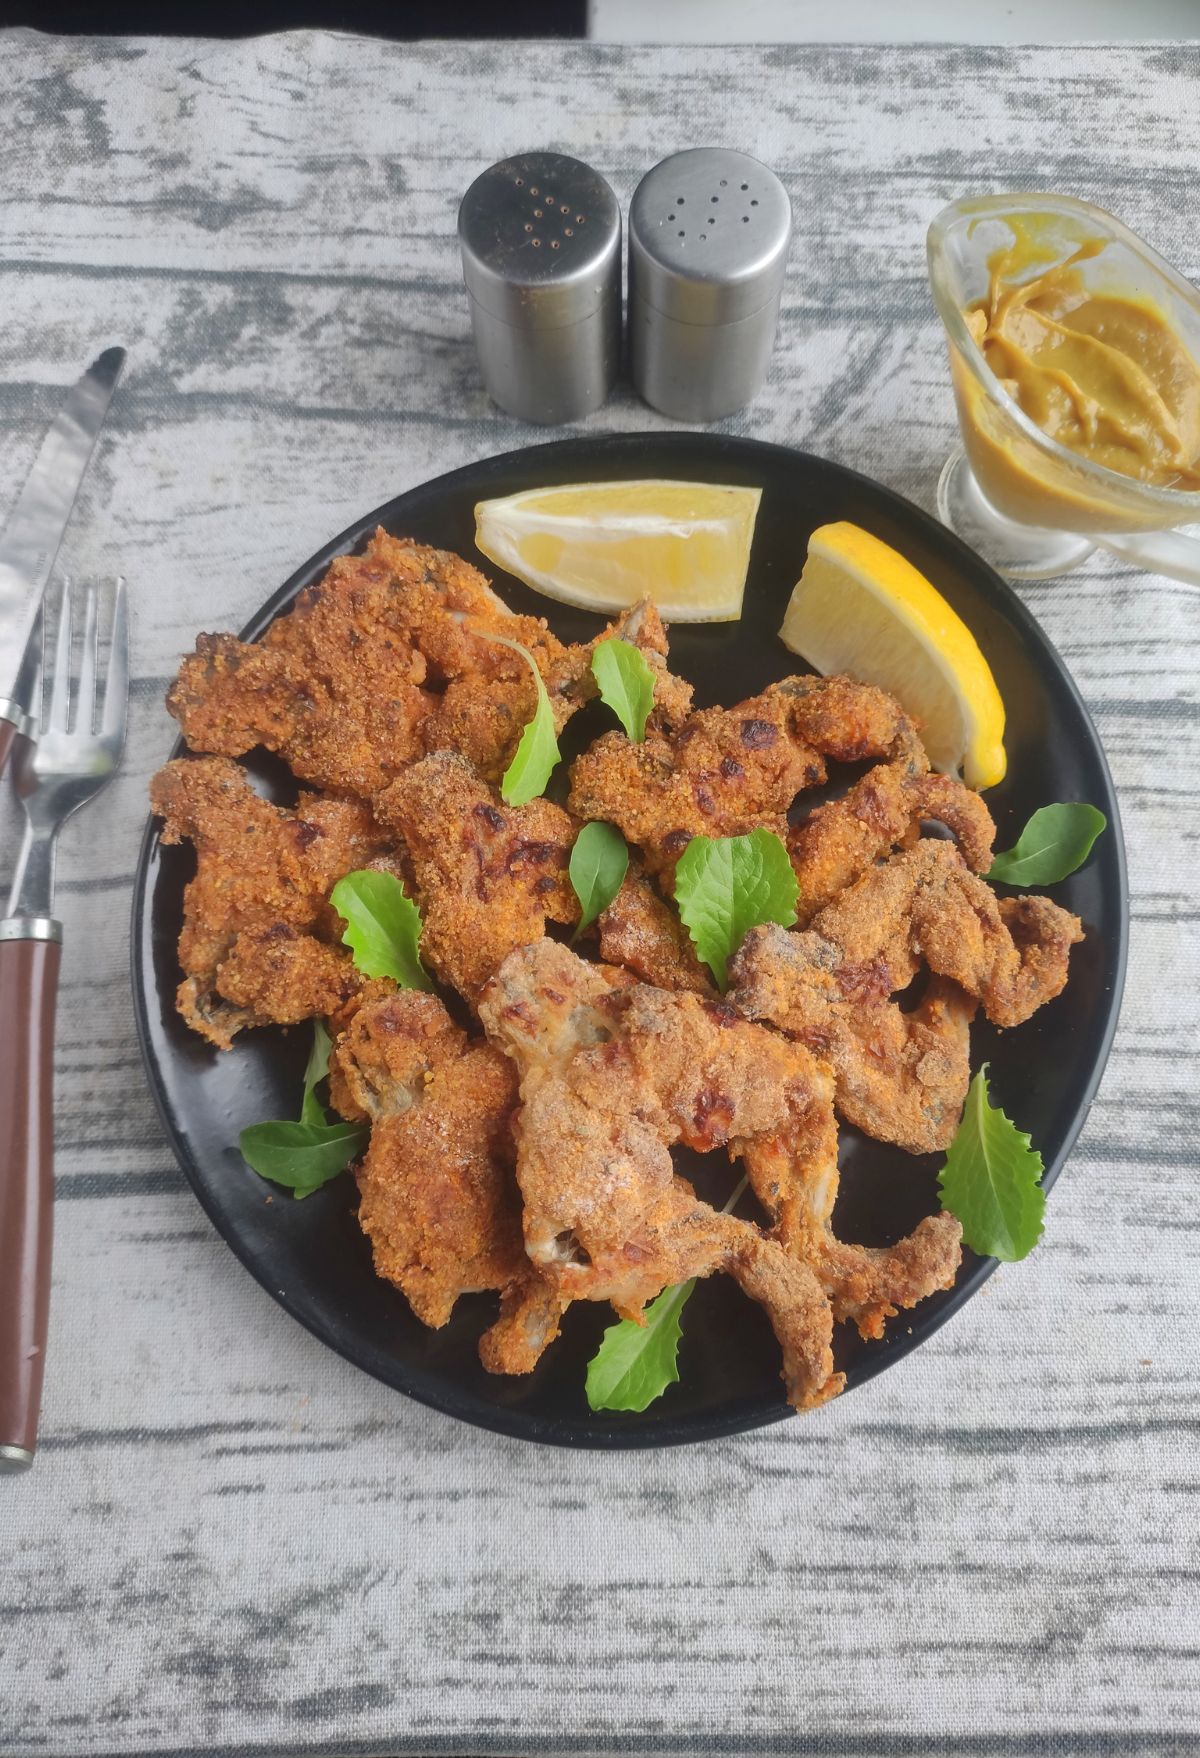 Air Fryer French-Style Frog Legs